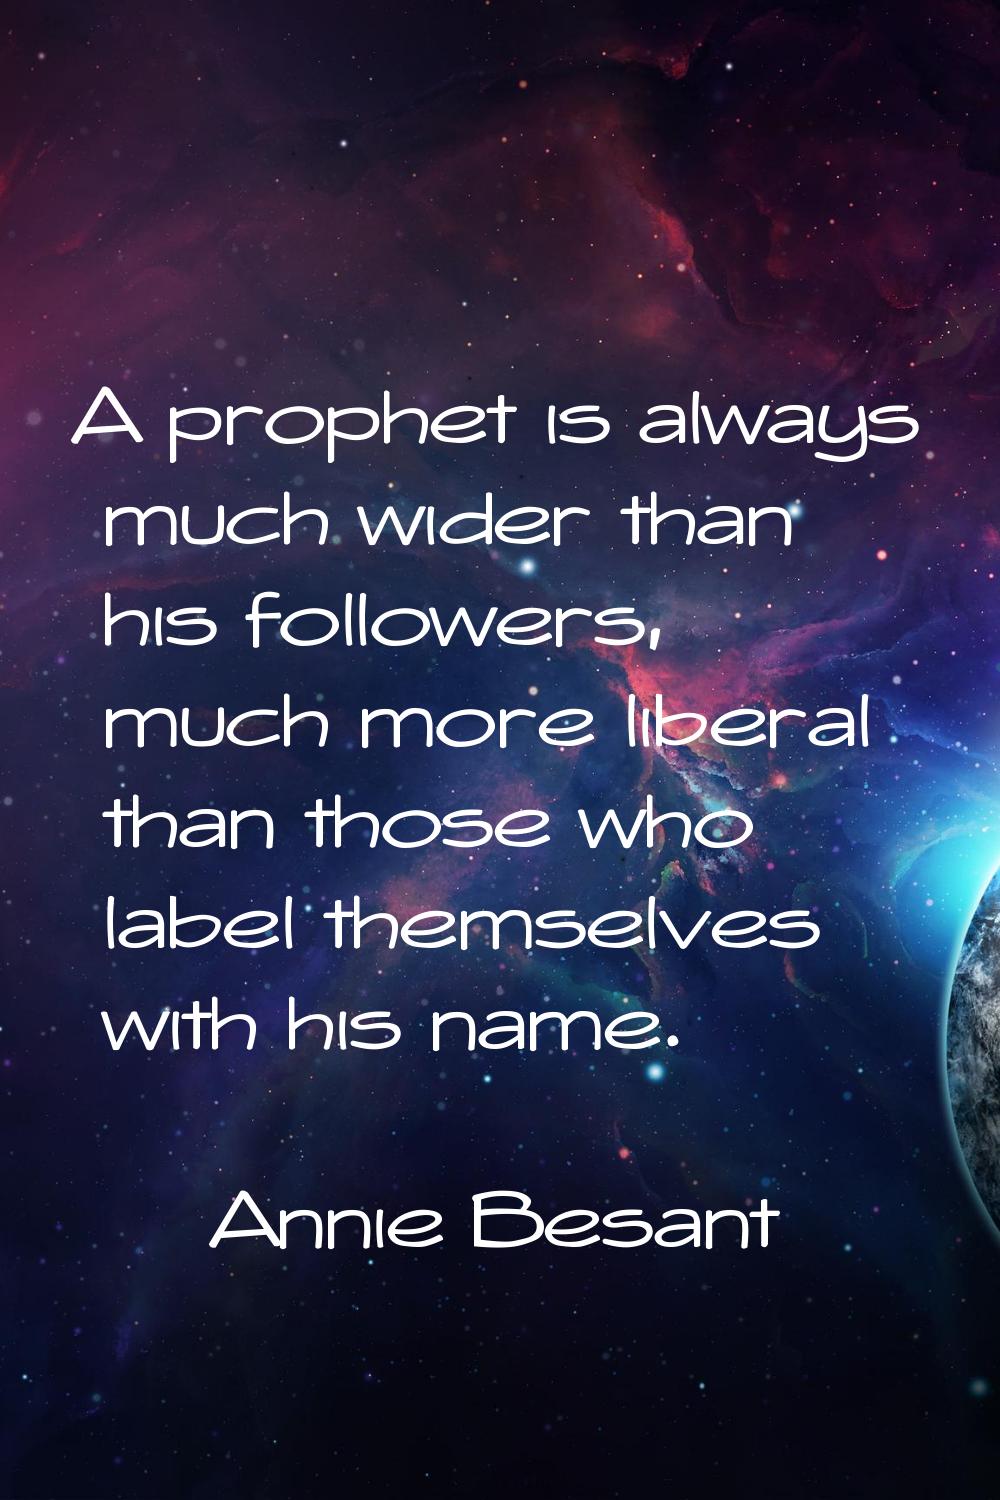 A prophet is always much wider than his followers, much more liberal than those who label themselve